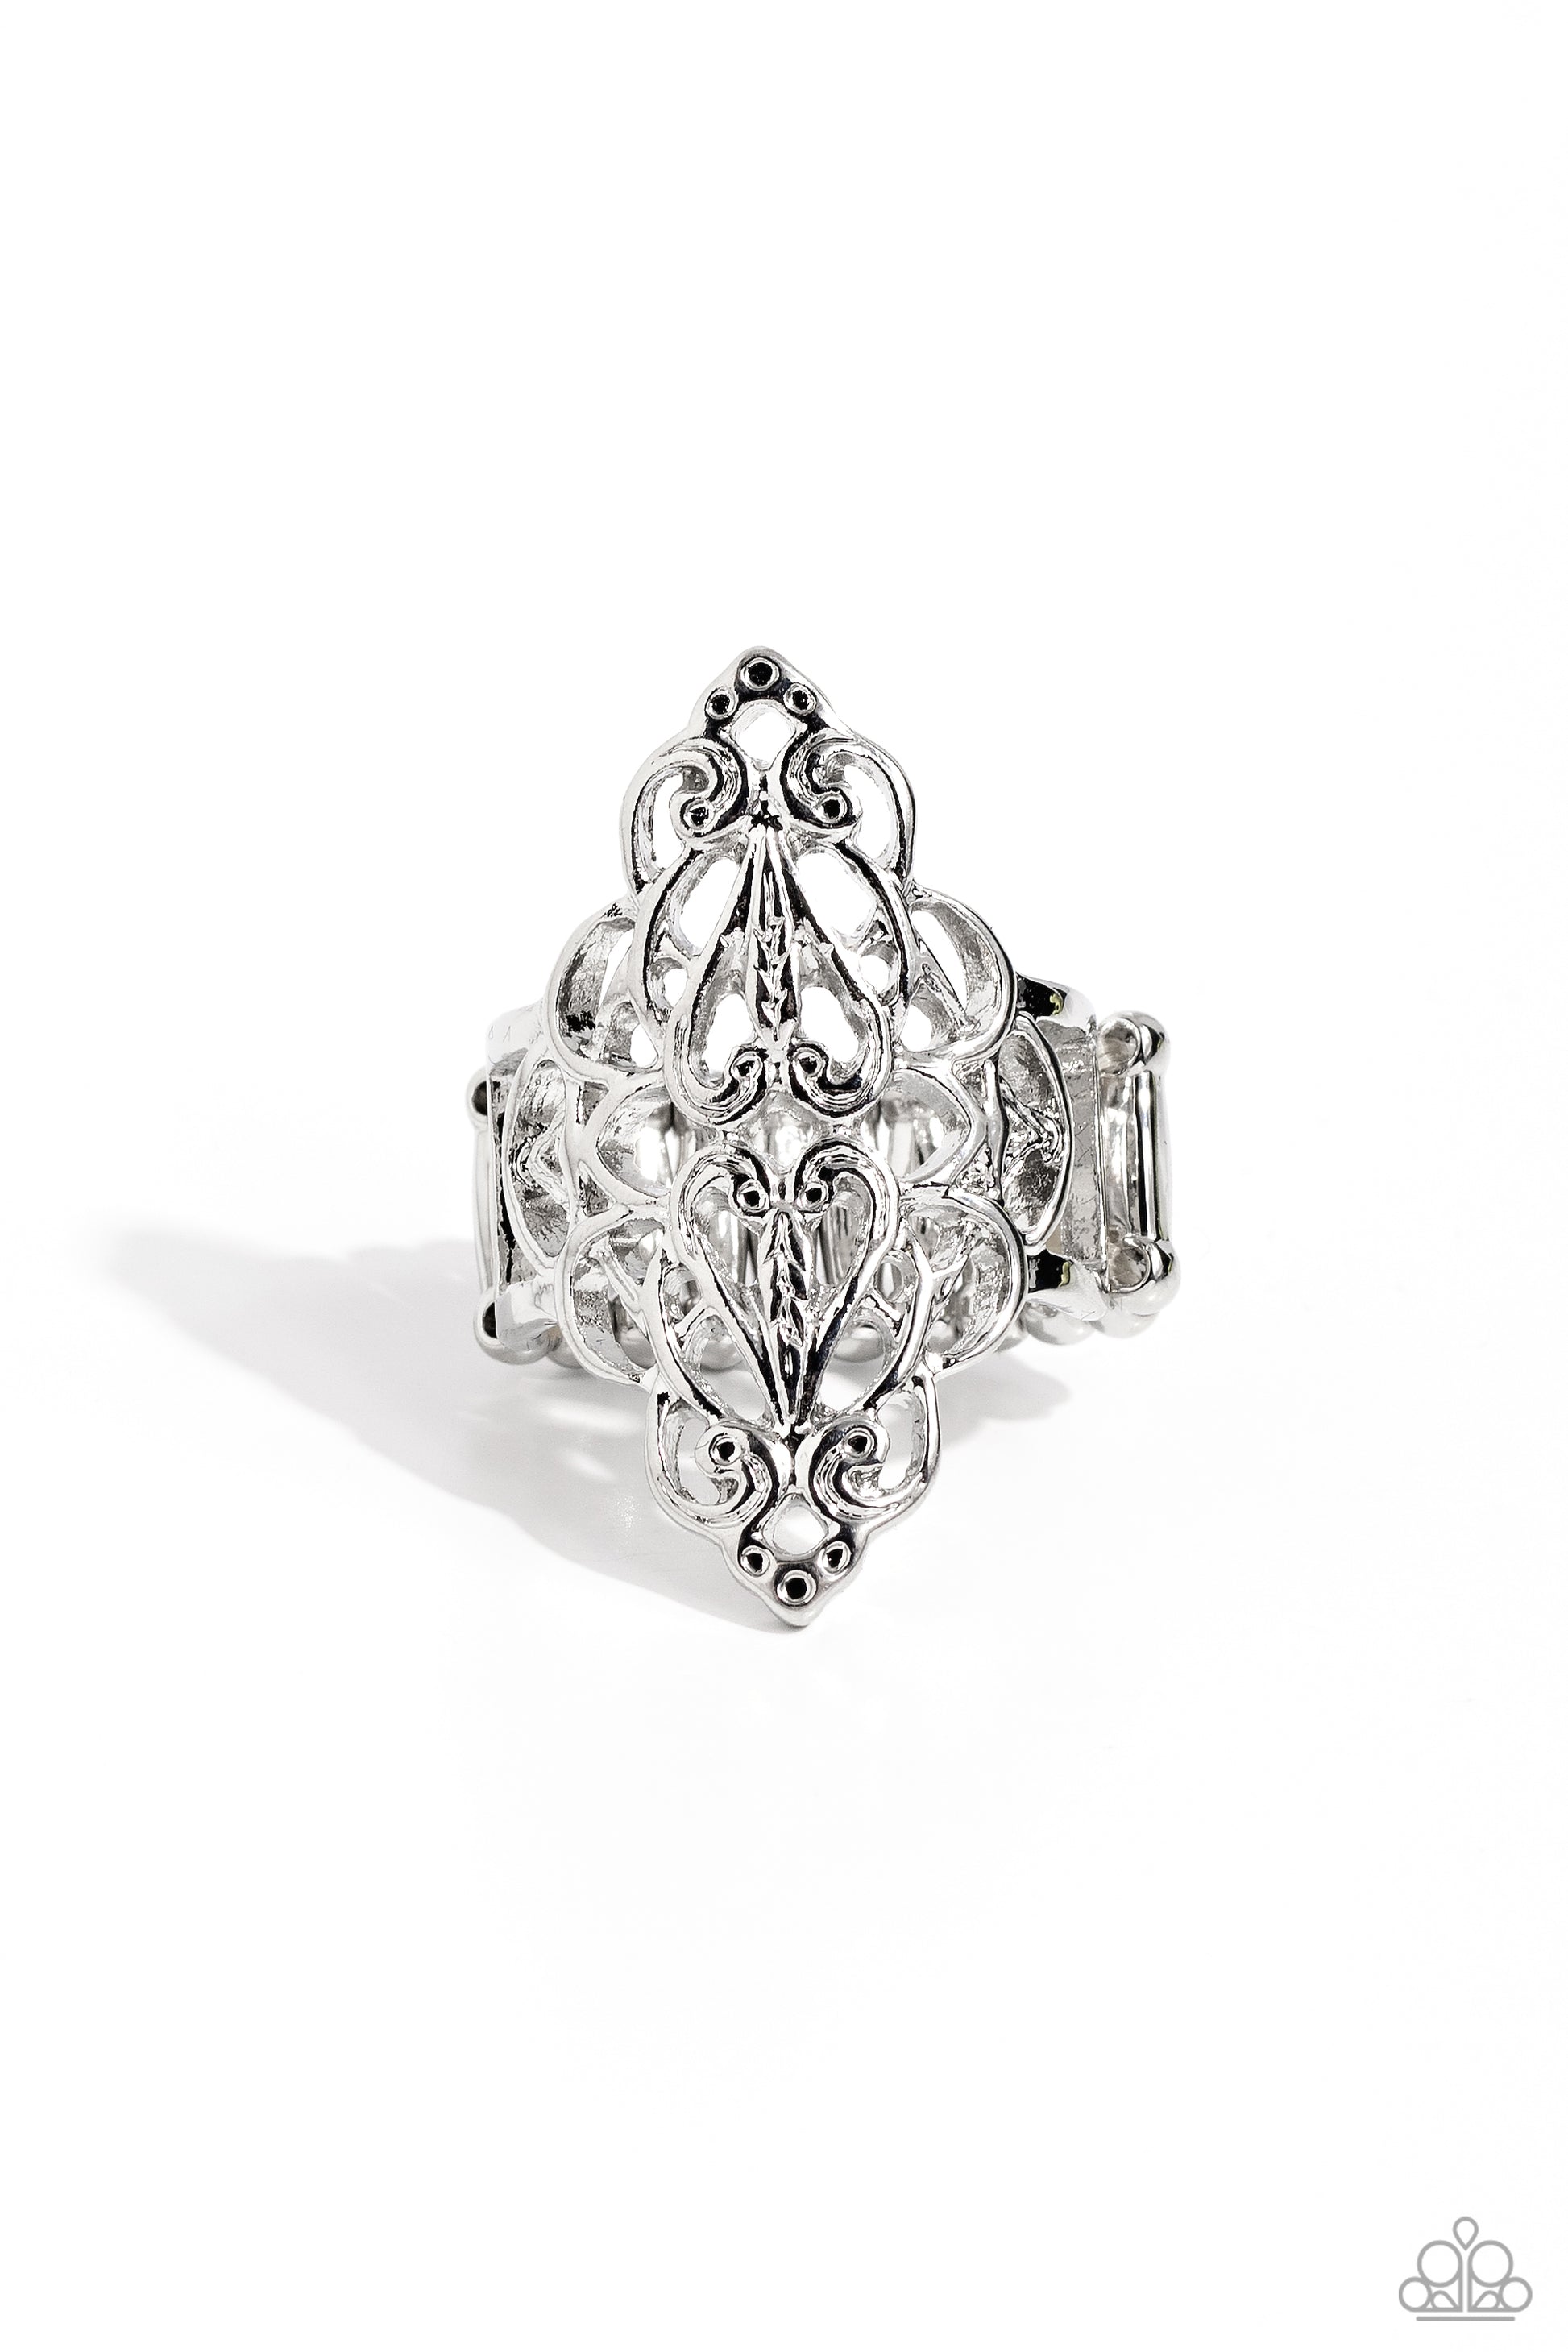 Curled Crown - silver - Paparazzi ring